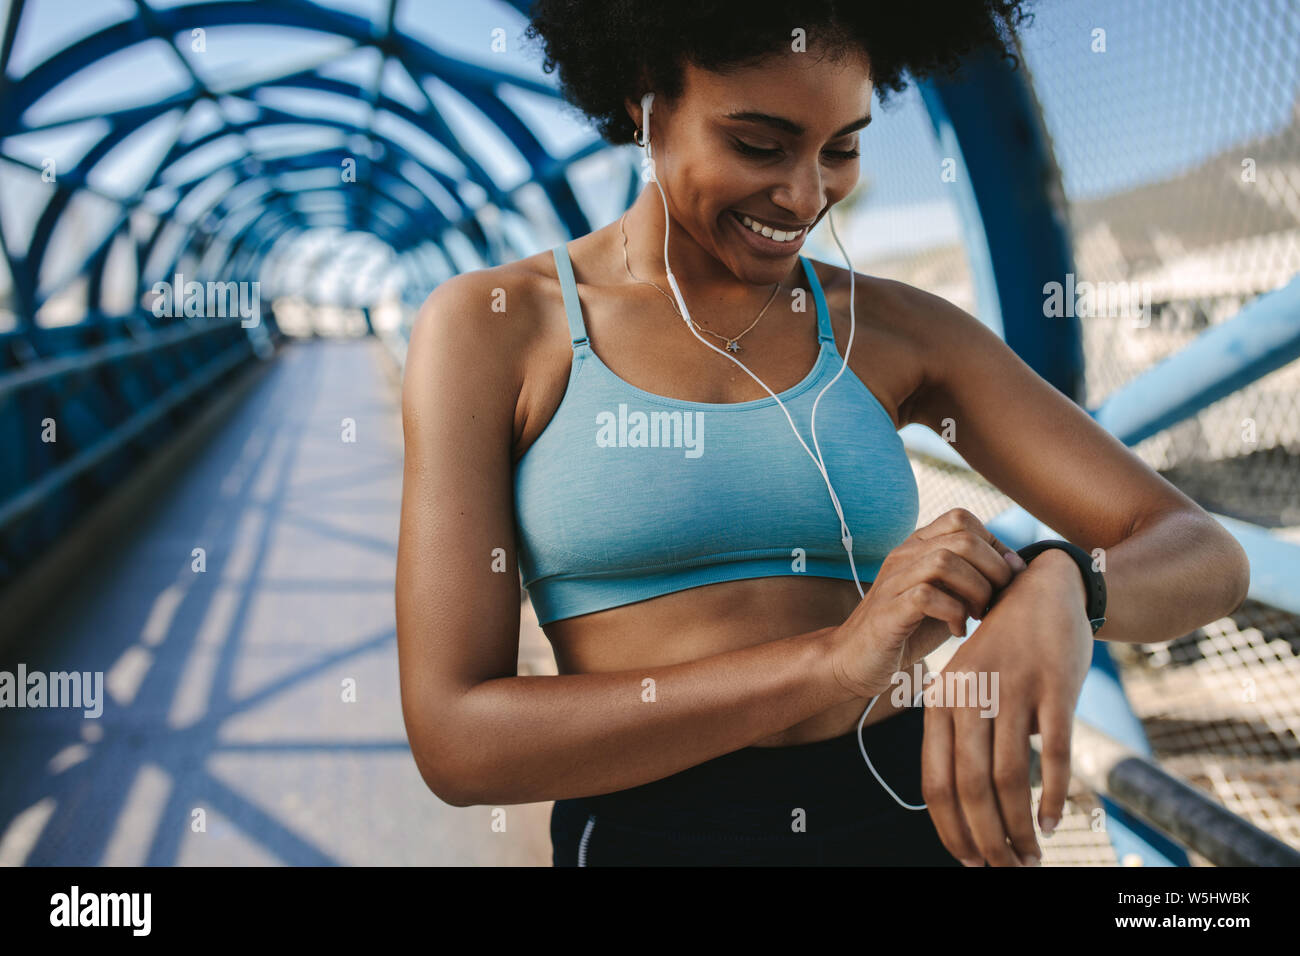 Fit female runner using smart watch to monitor her performance. African Woman setting fitness app on her smart watch before running session. Stock Photo